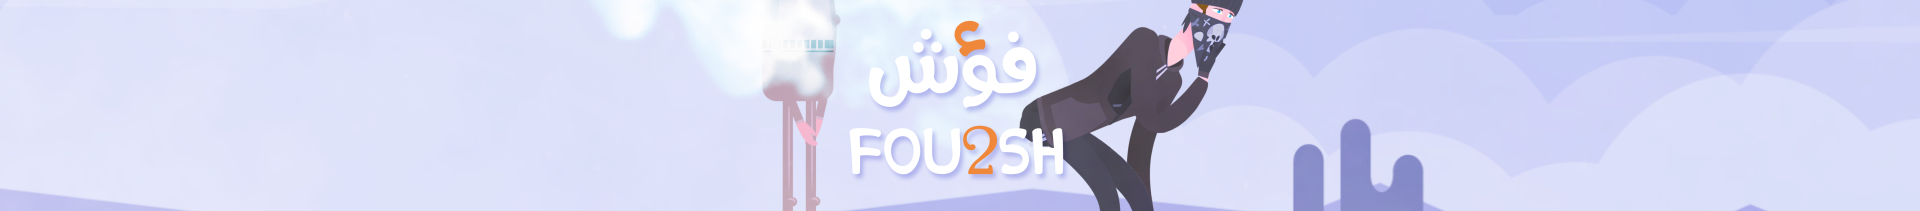 Ahmed Fouads profilbanner